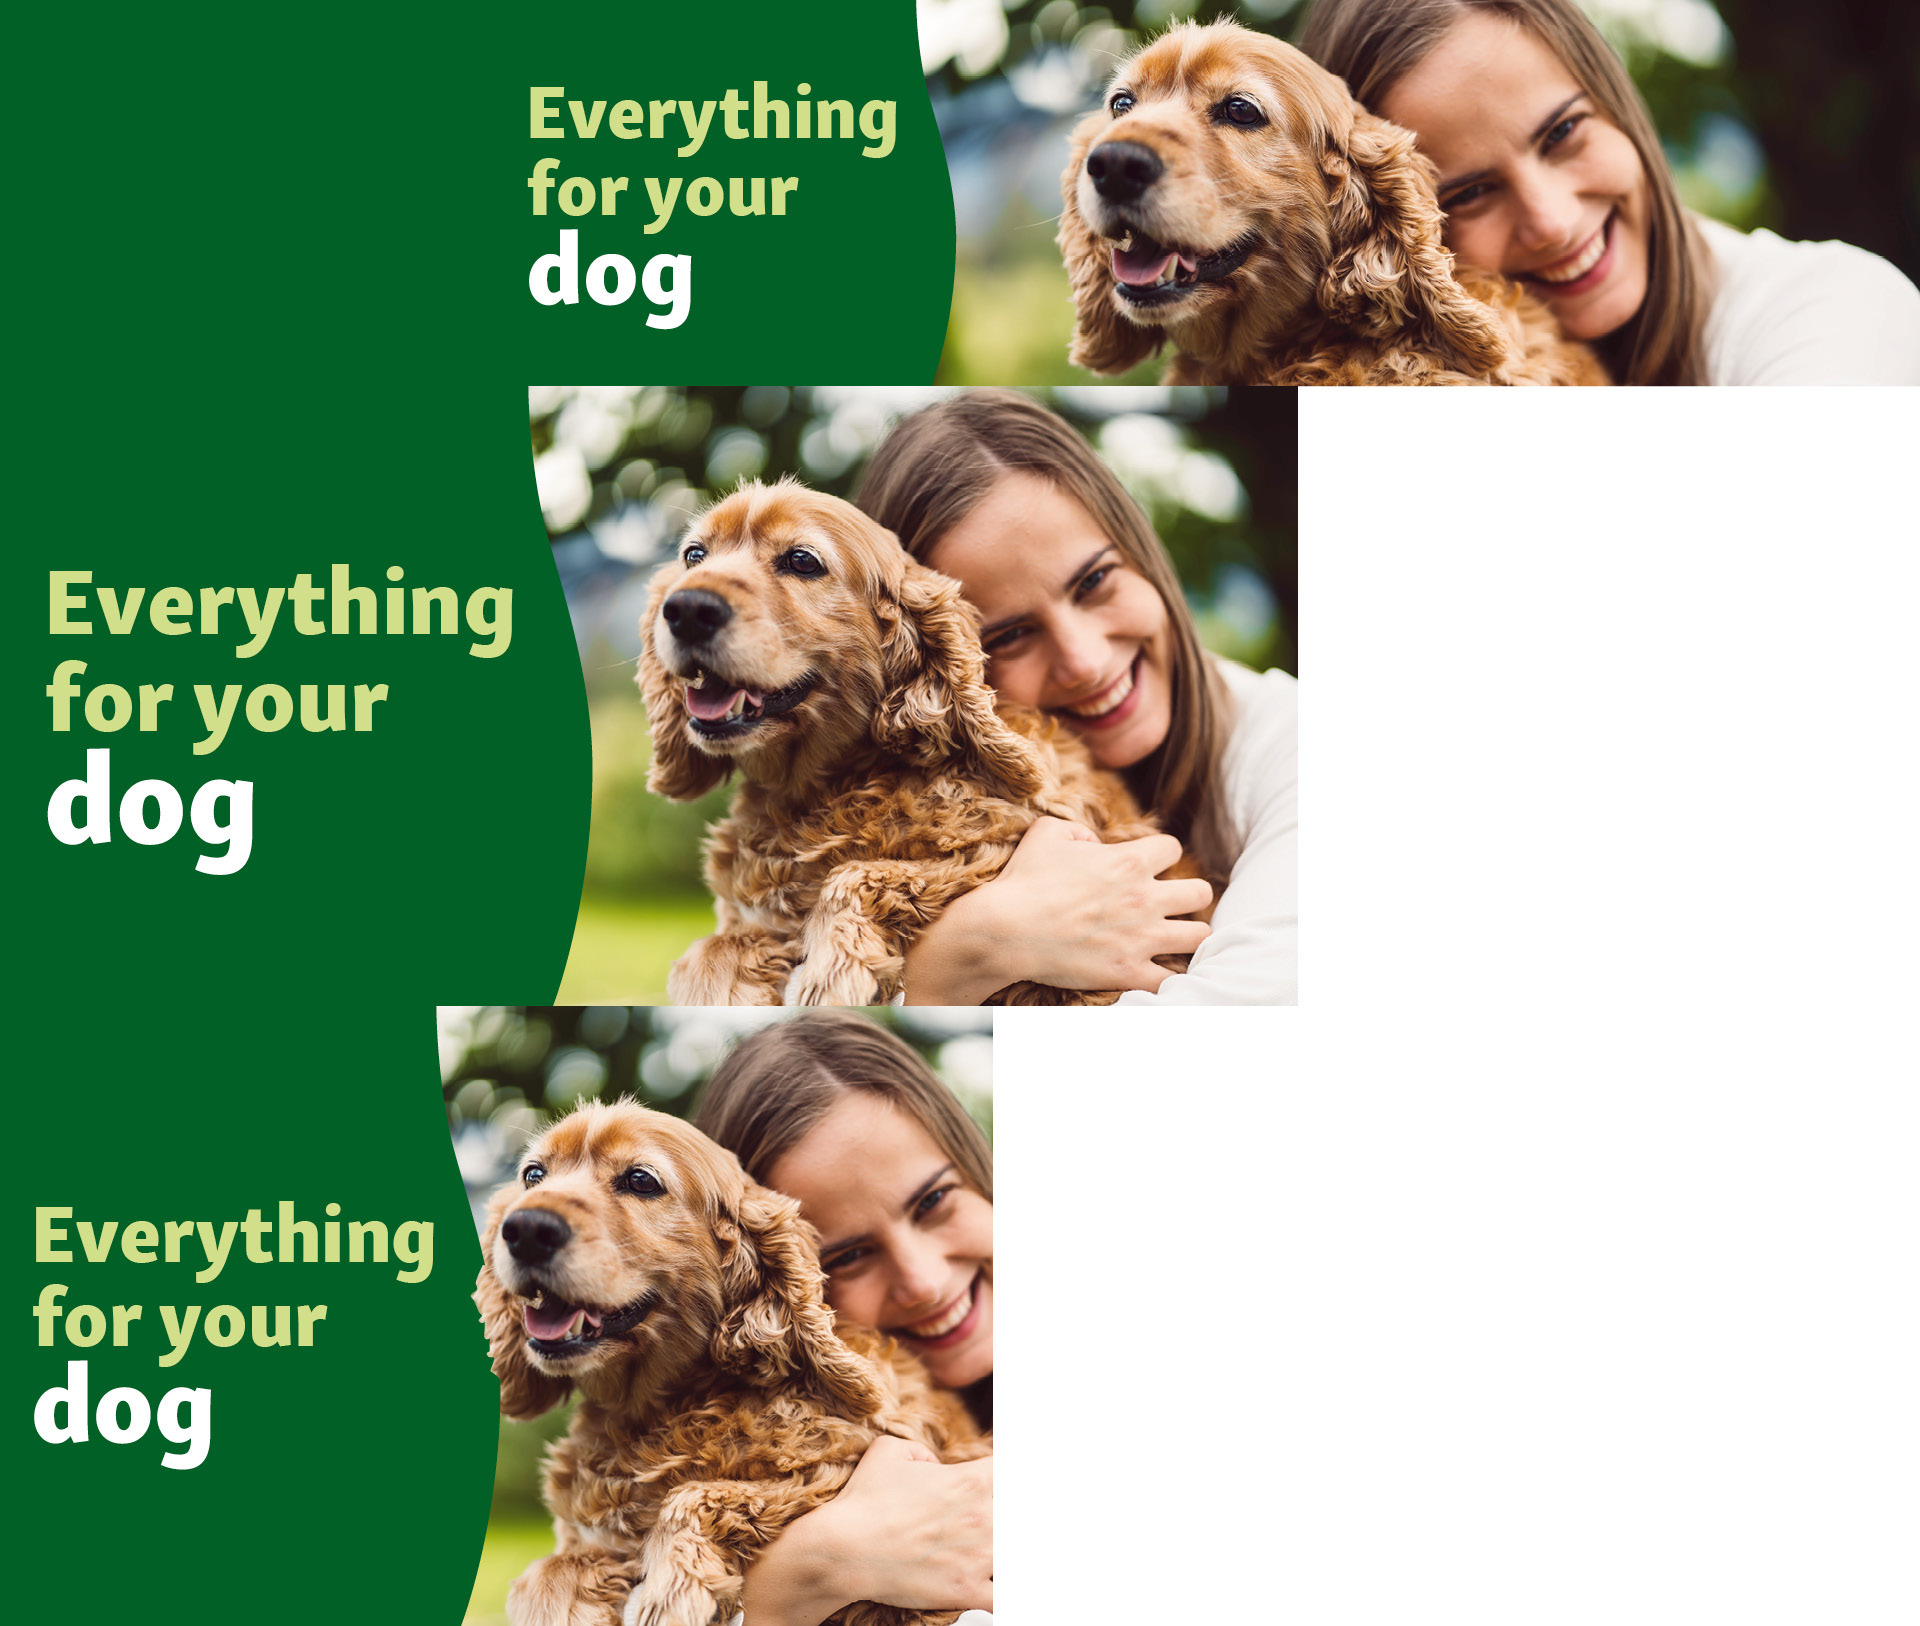 Everything for your dog